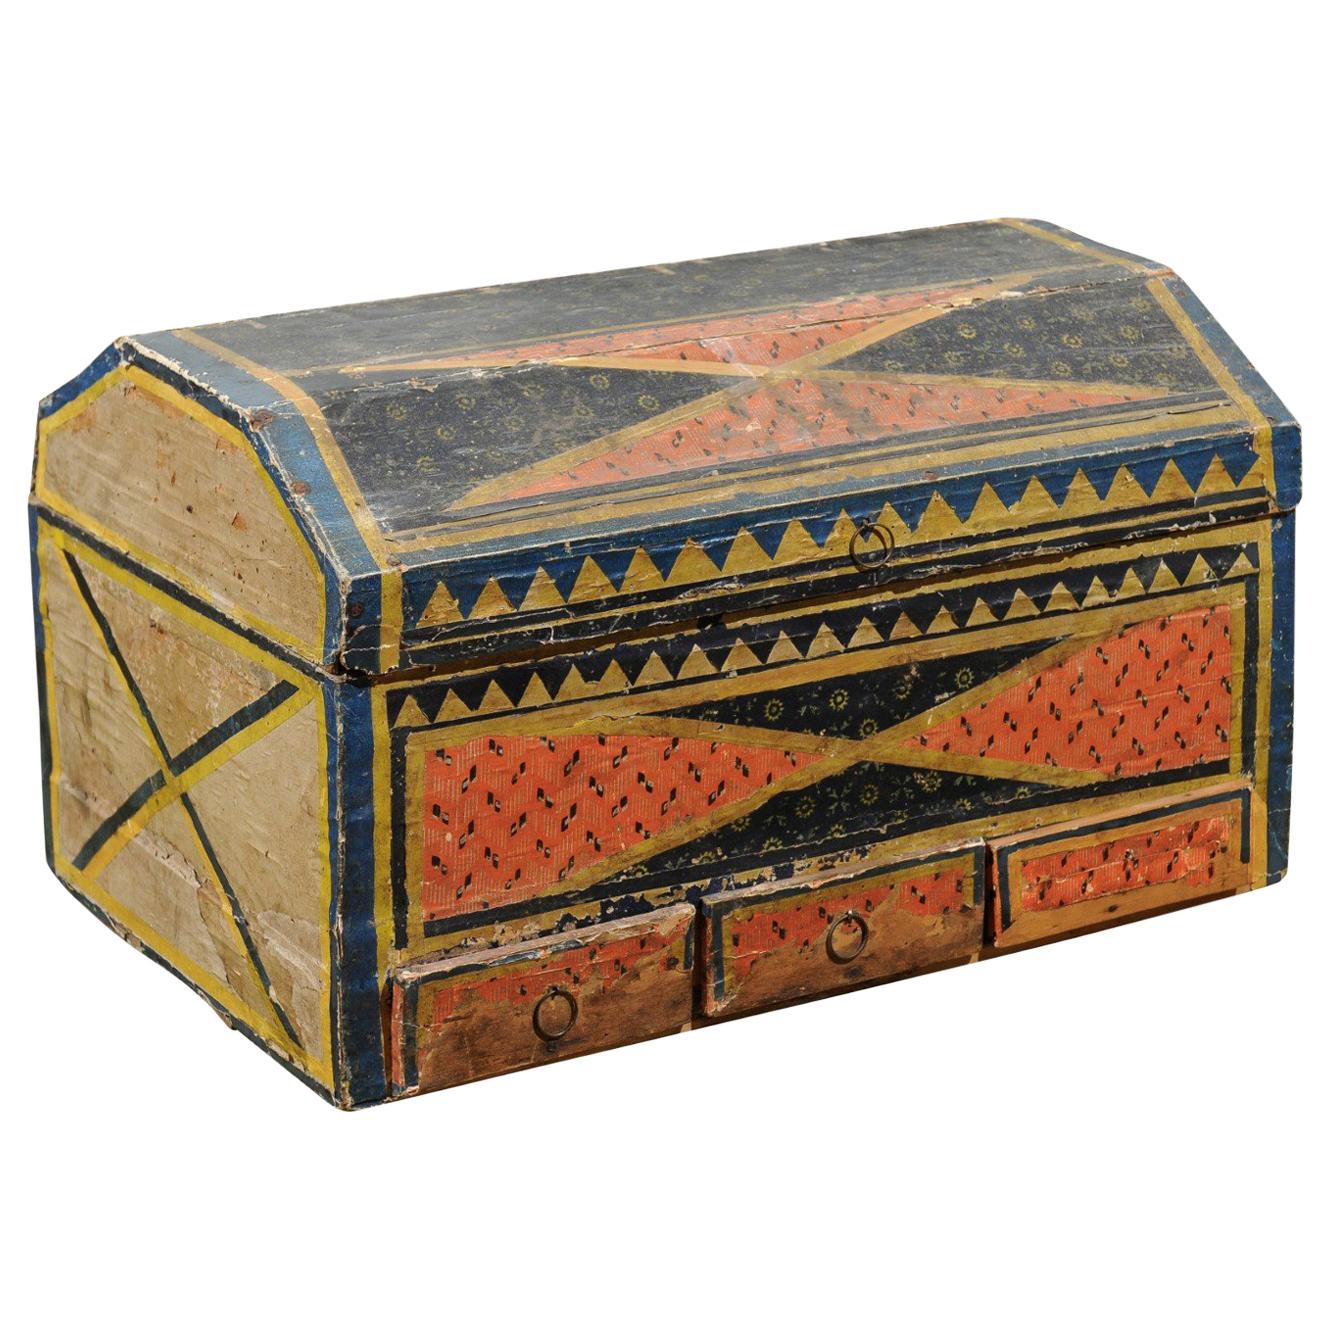 Continental 19th Century Decorated Painted Paper Lined Wooden Box